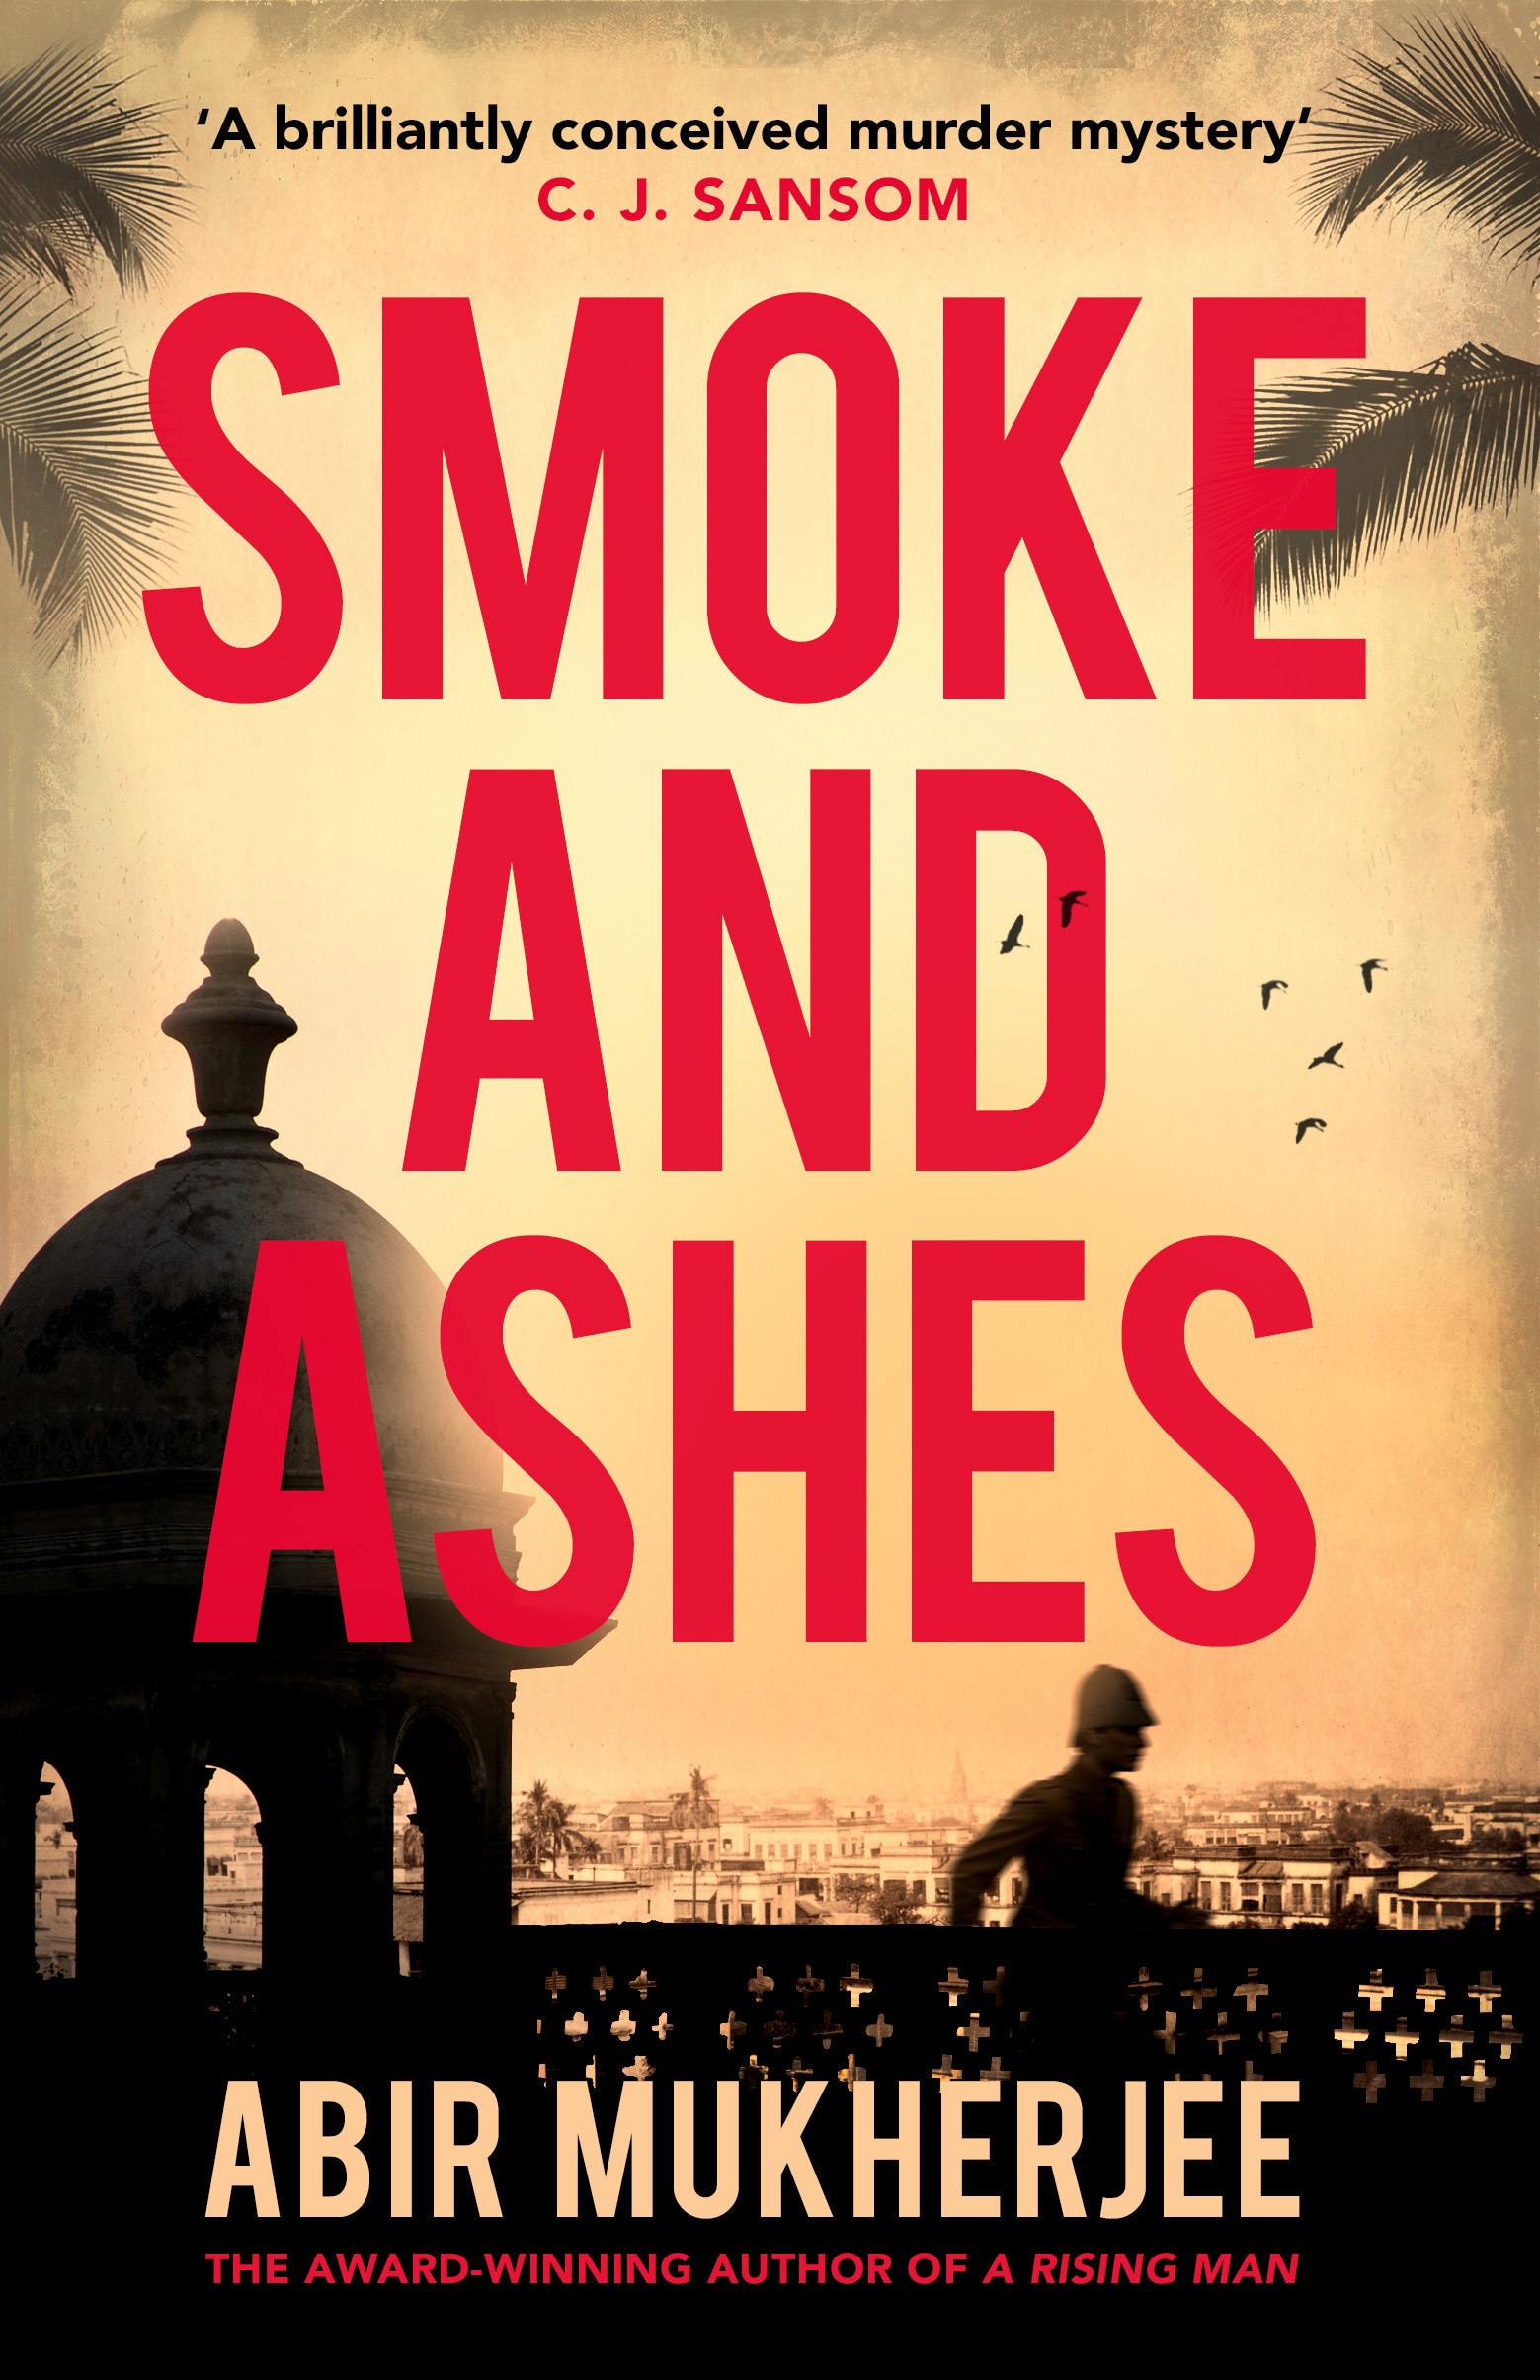 Book “Smoke and Ashes” by Abir Mukherjee — June 13, 2019